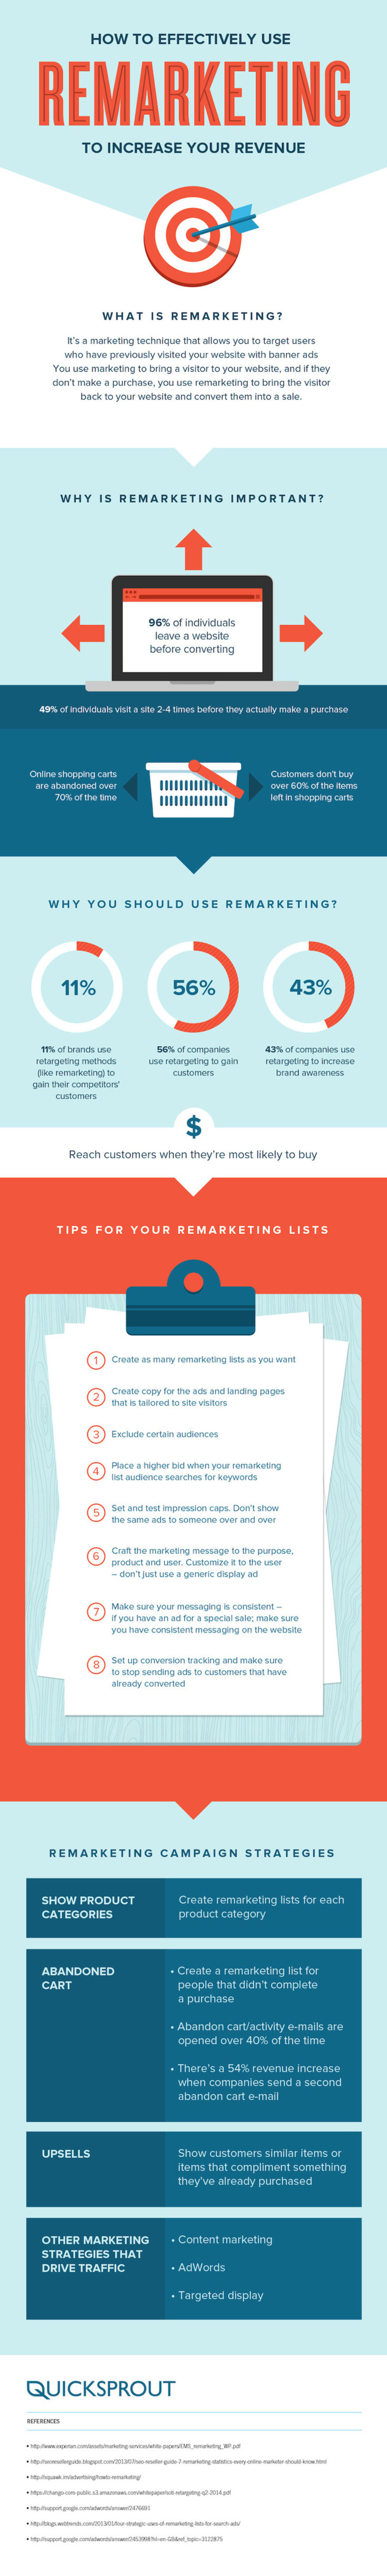 How to Effectively Use Remarketing (Infographic) - Kissmetrics | The MarTech Digest | Scoop.it